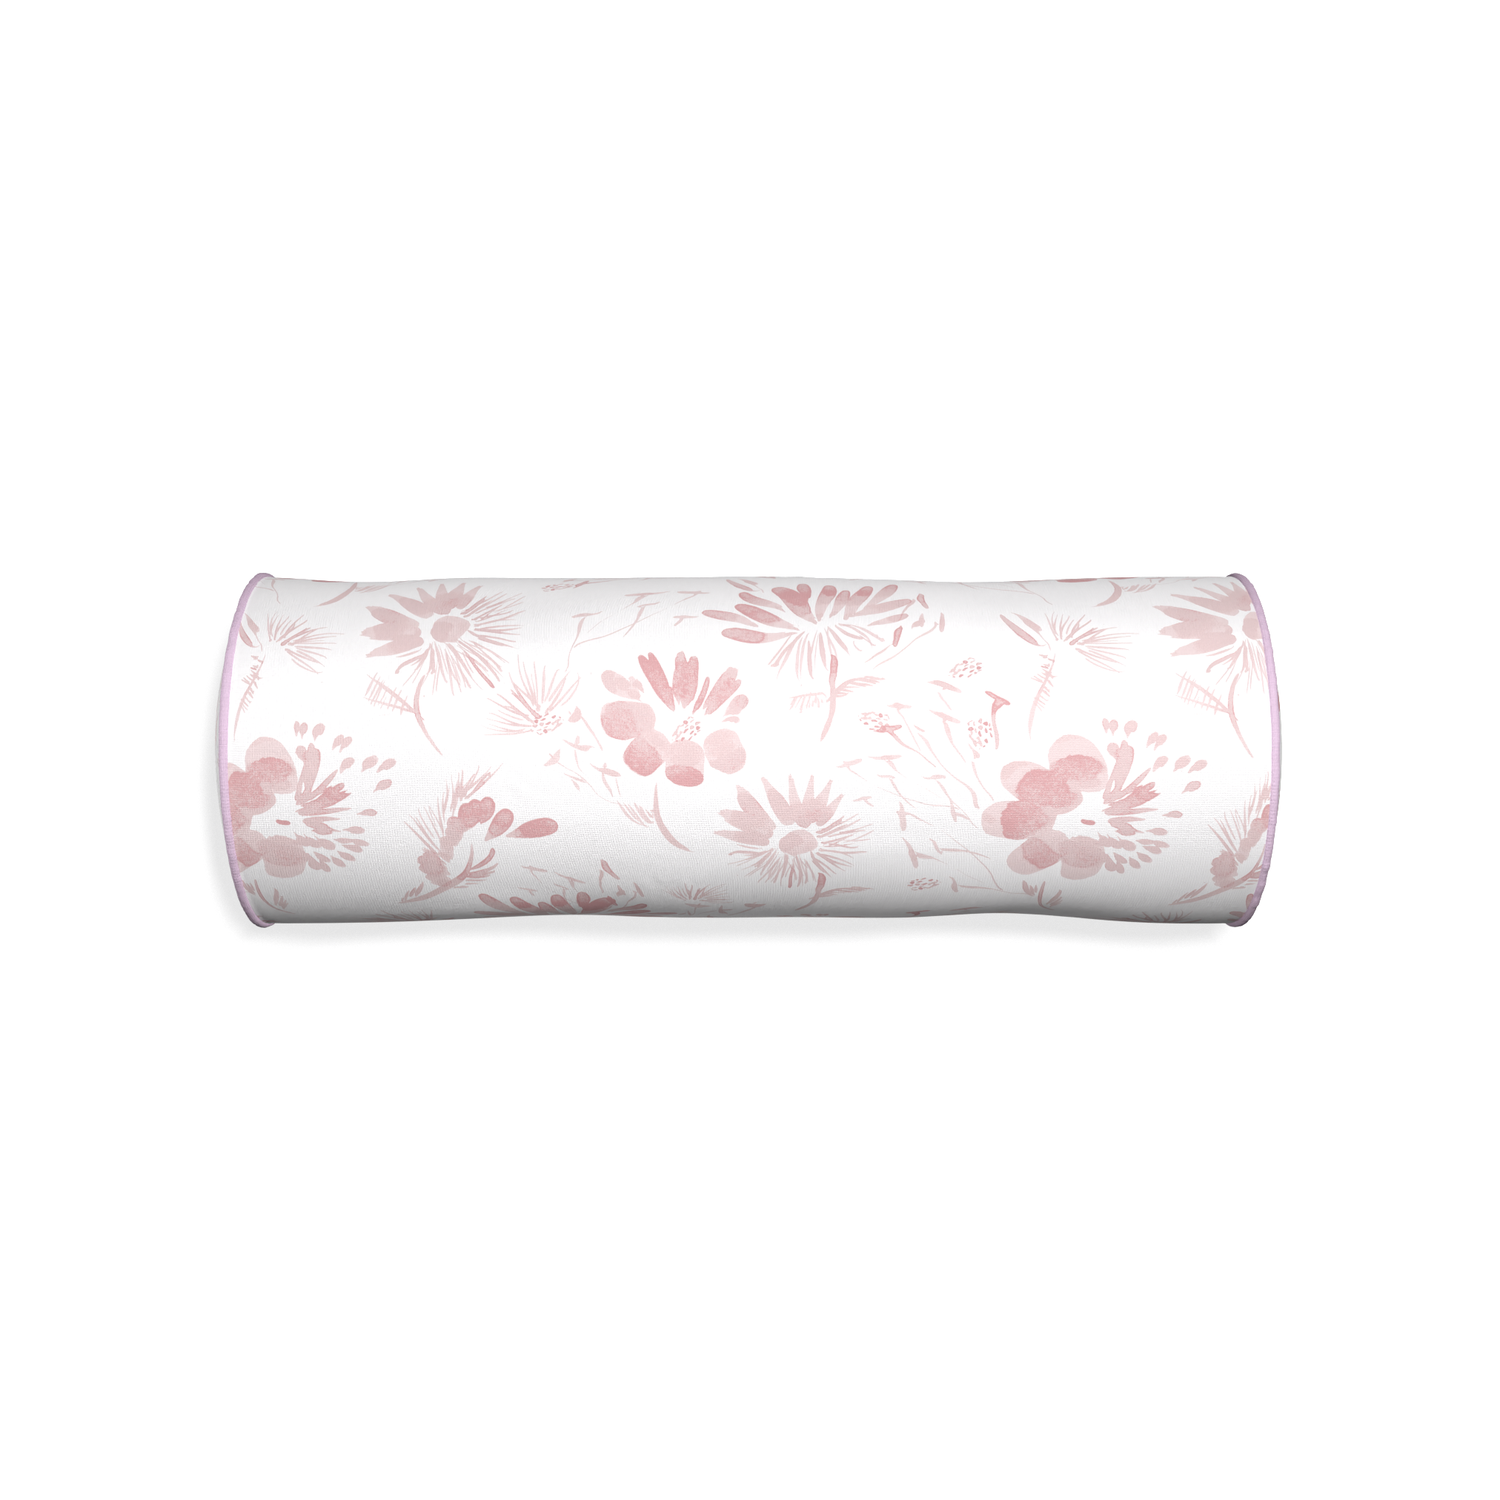 Bolster blake custom pink floralpillow with l piping on white background